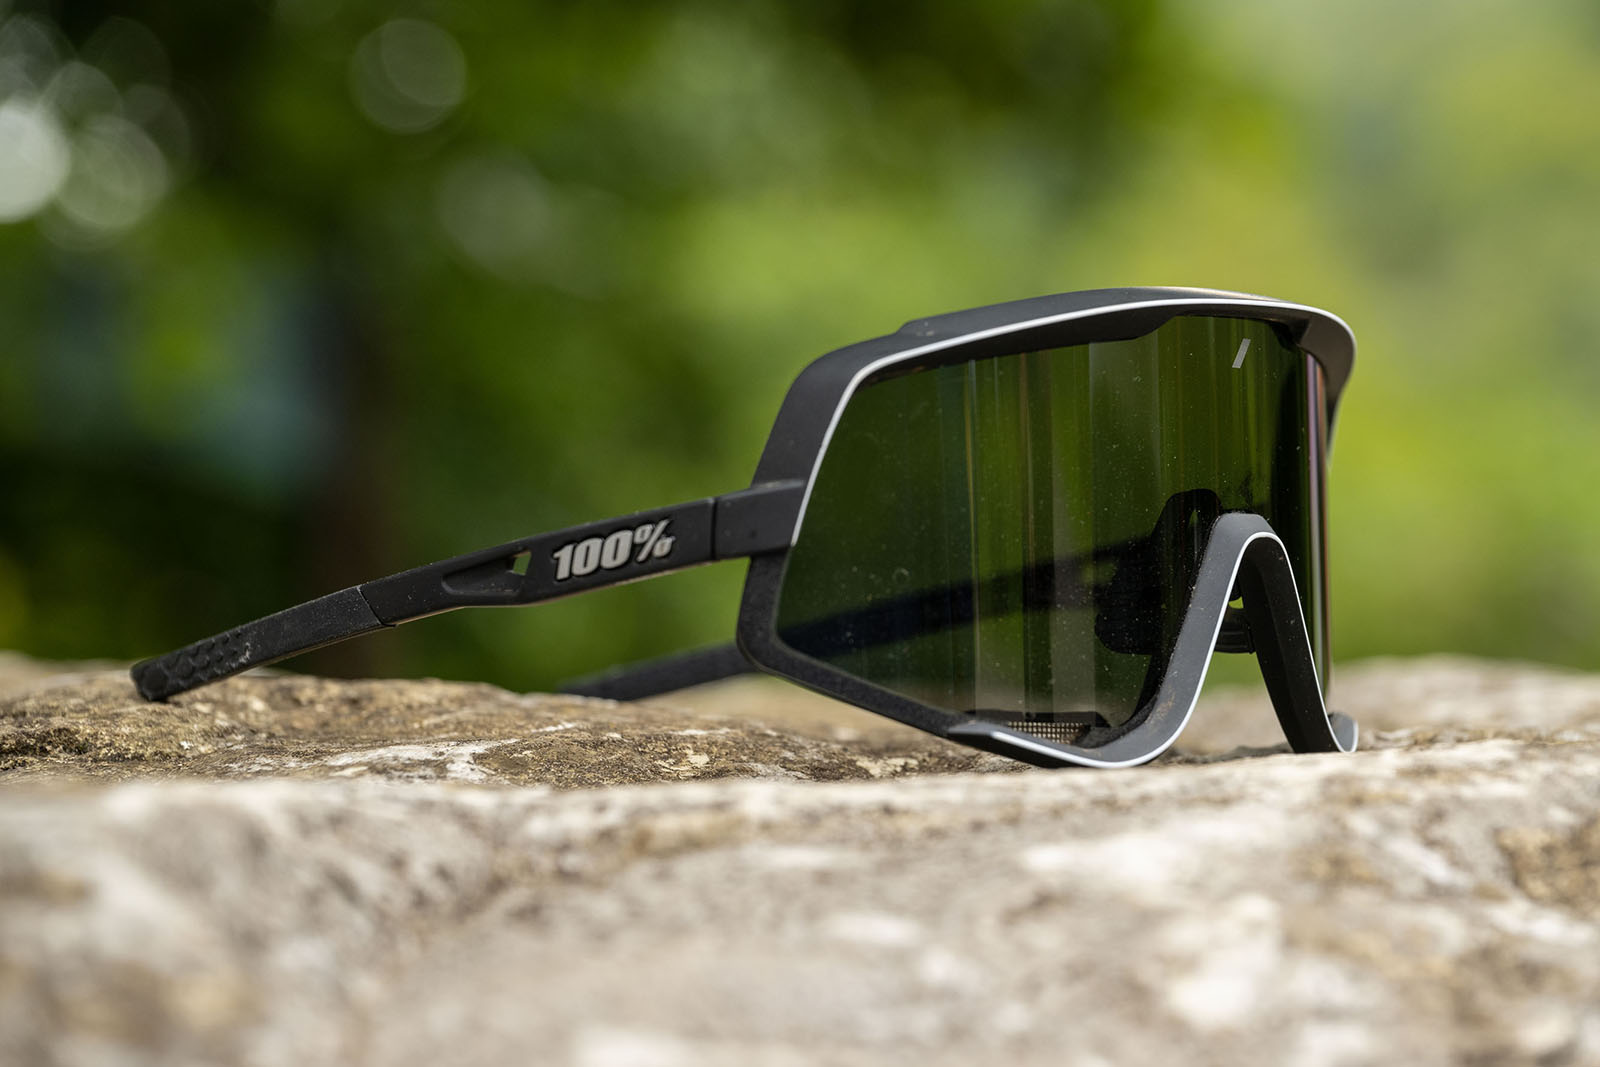 Vincero Sunglasses Review: I Tried Their Most Popular Styles